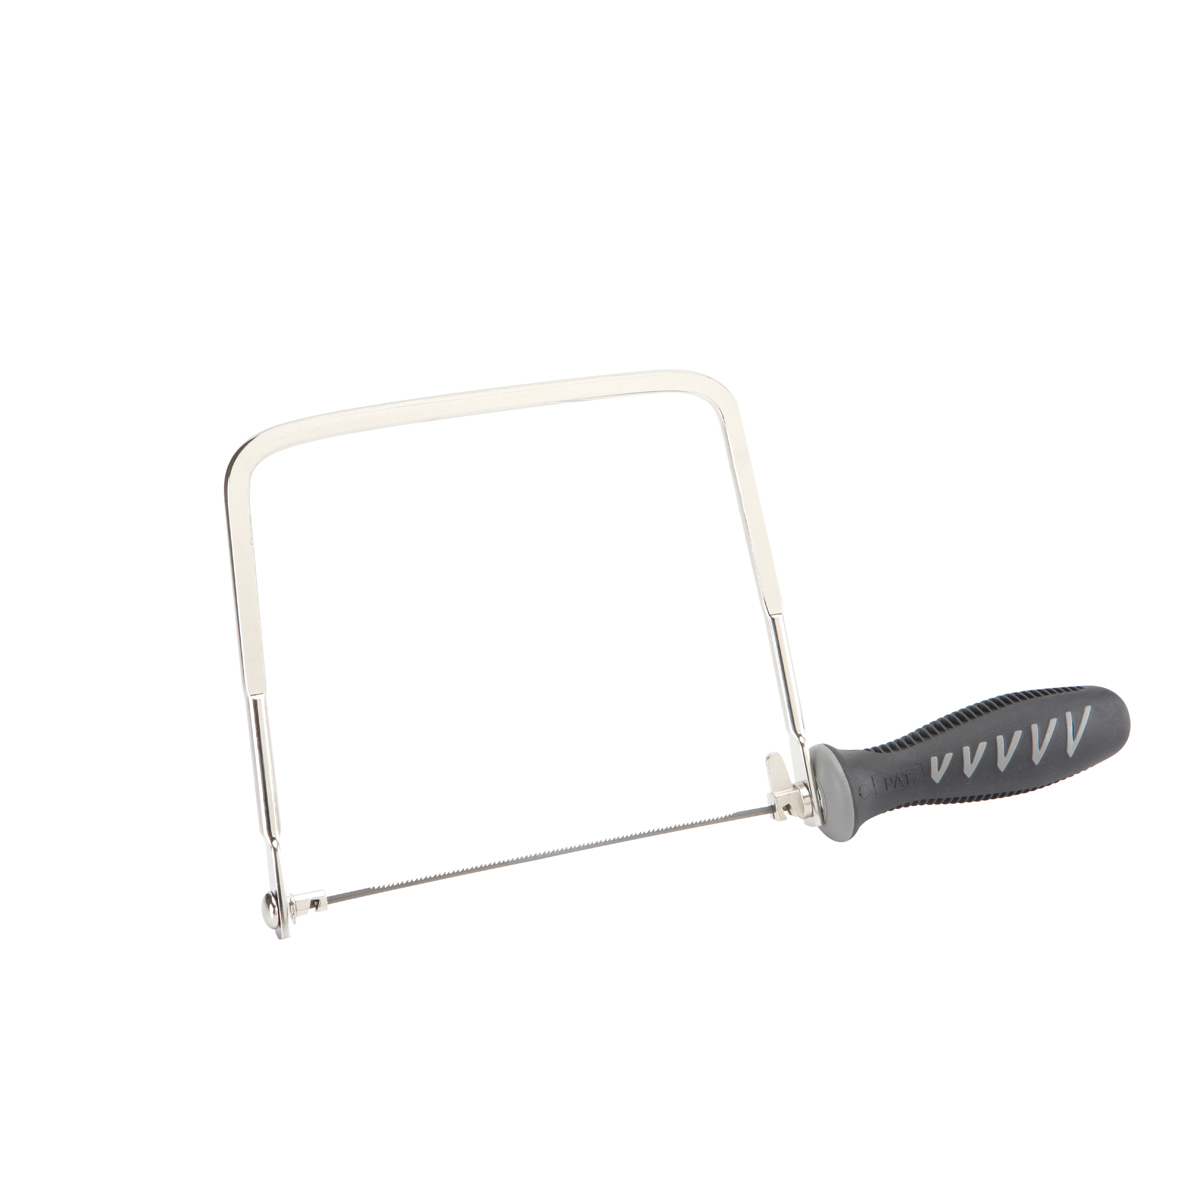 PORTLAND 6 in. Coping Saw with High Carbon Steel Blade - Item 60369 / 94848